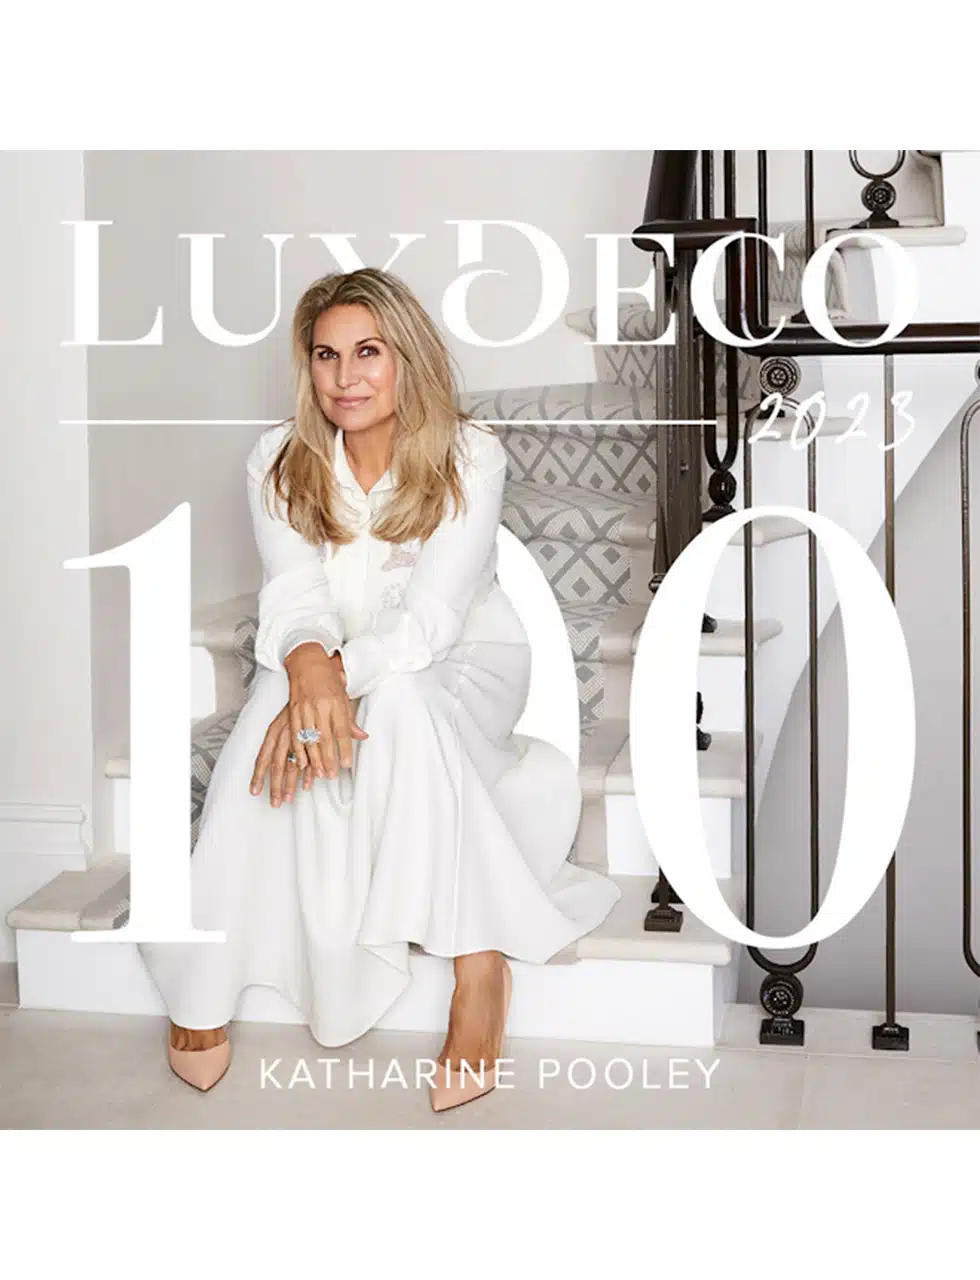 Katharine Pooley is once again included in the LuxDeco 100, an exclusive list of the worlds best interior designers